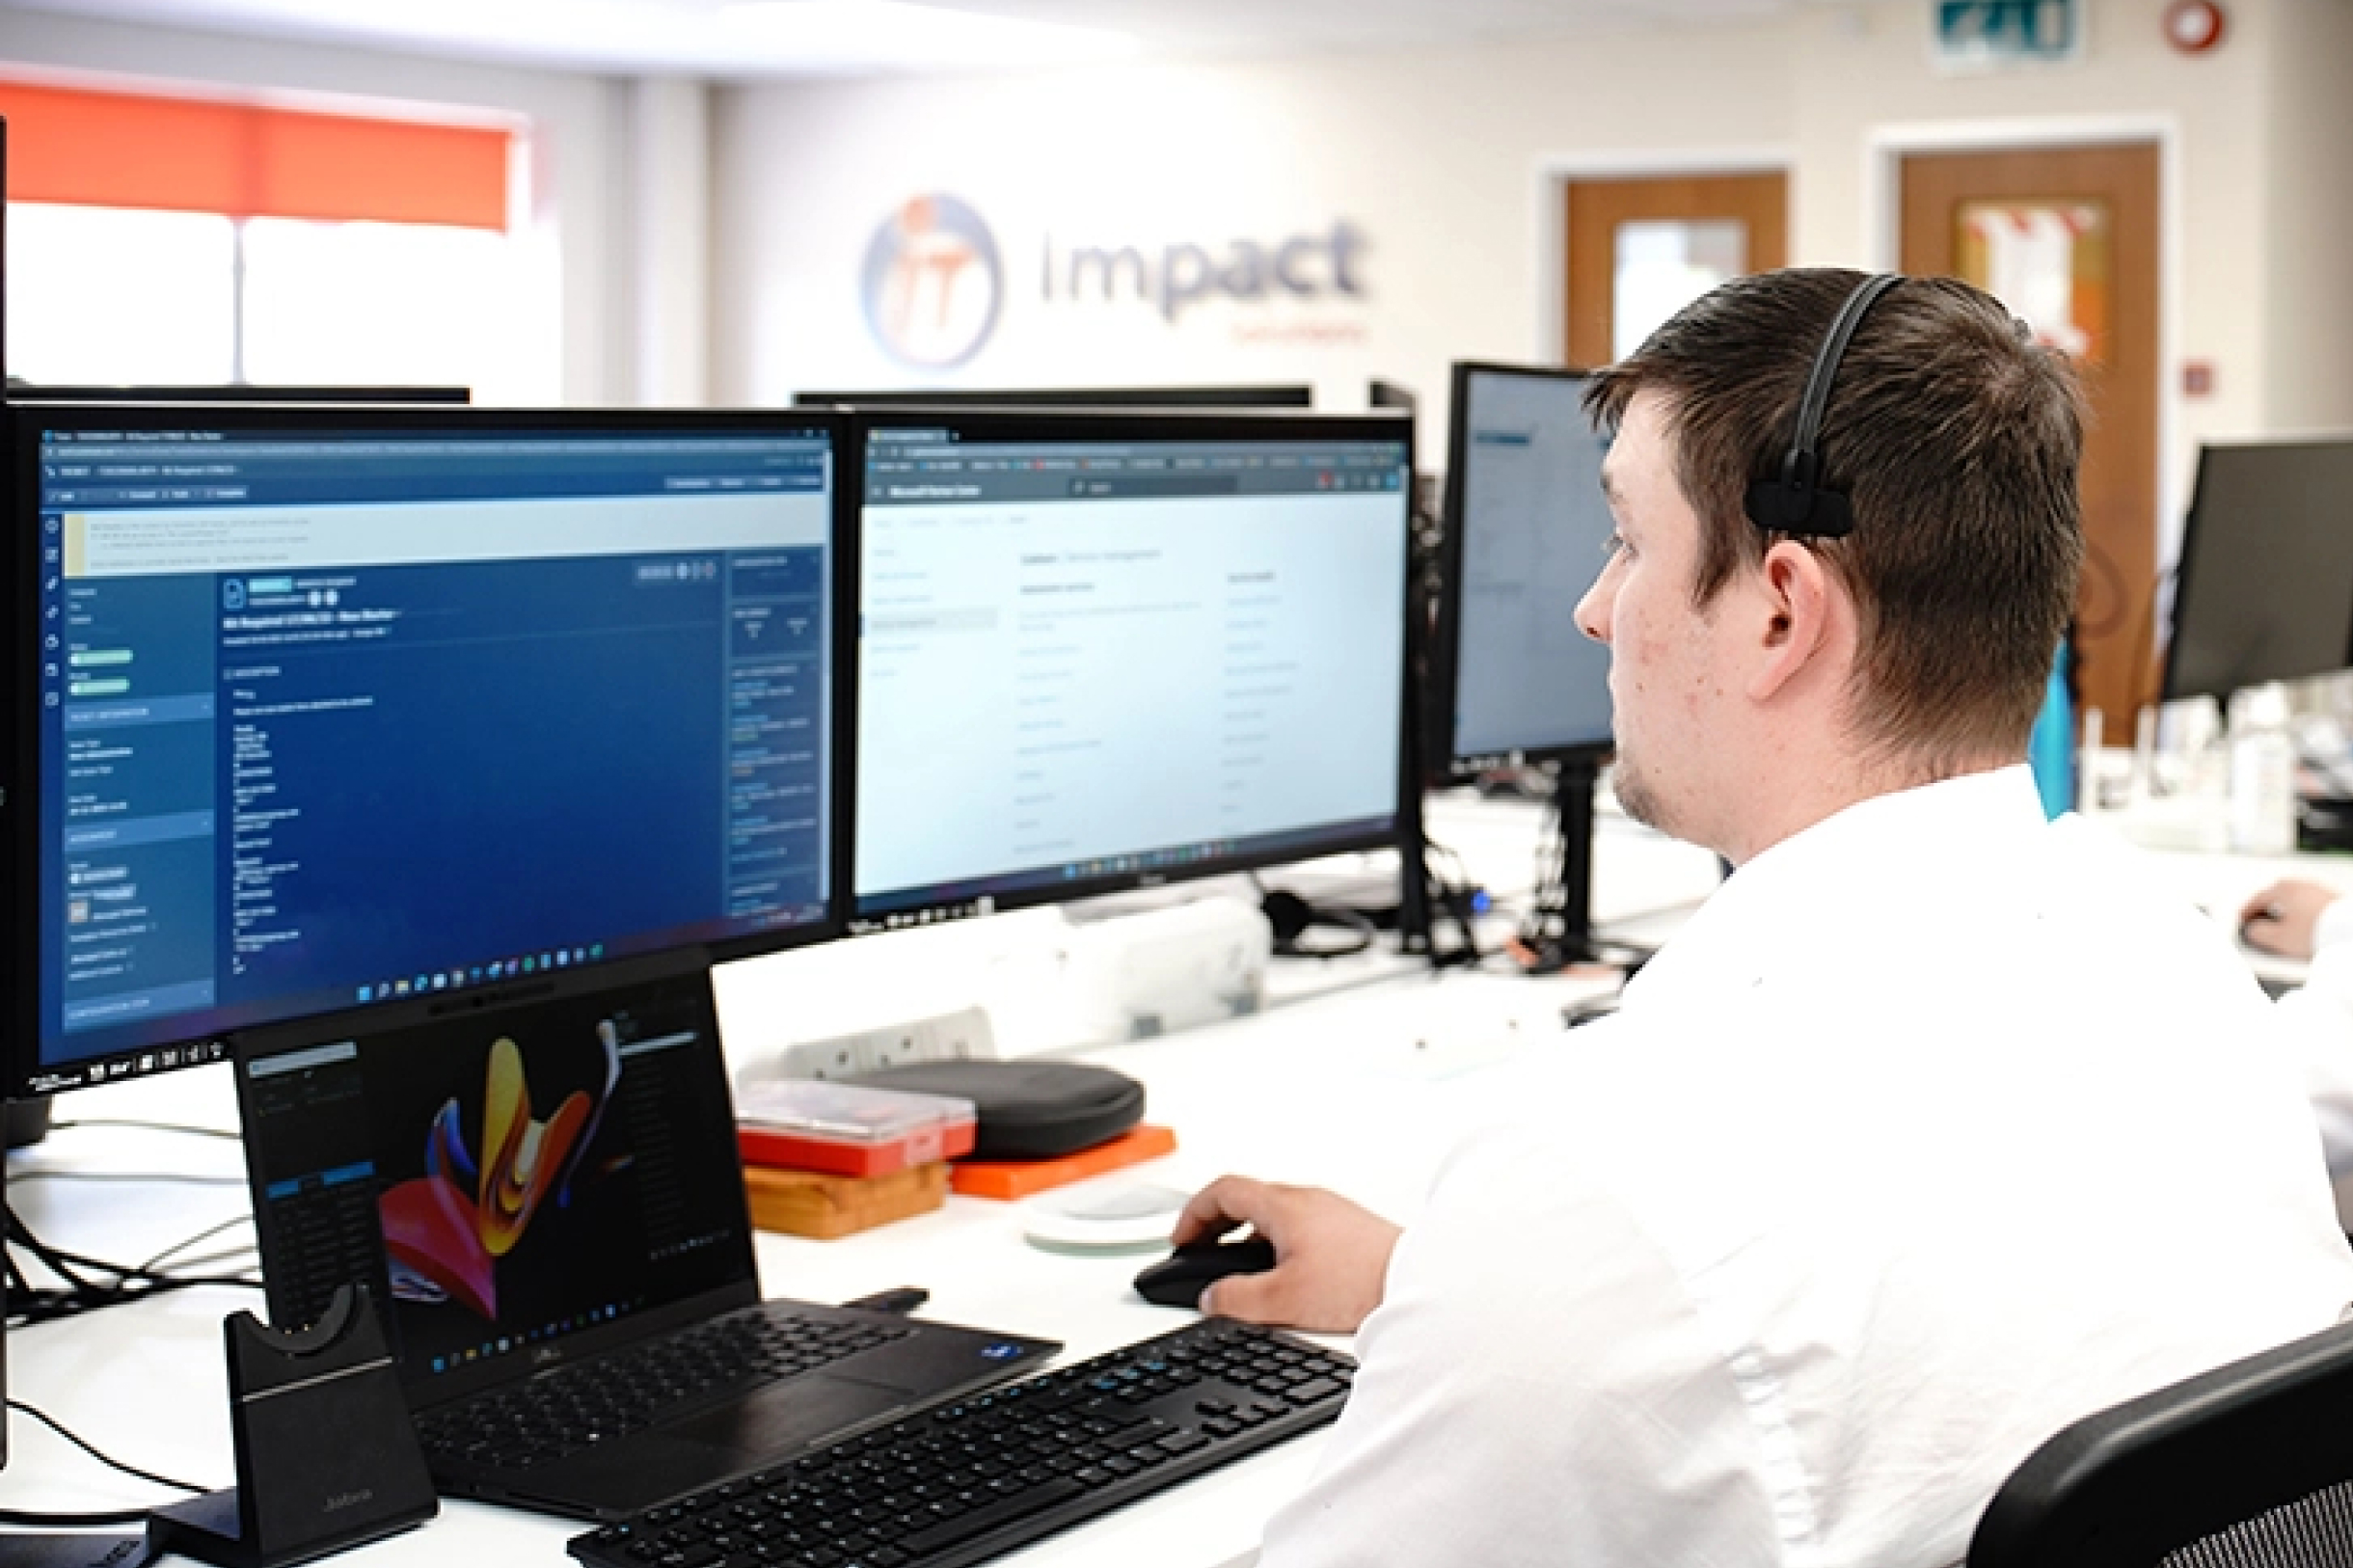 Impact IT Support Desk - How to choose the best MSP